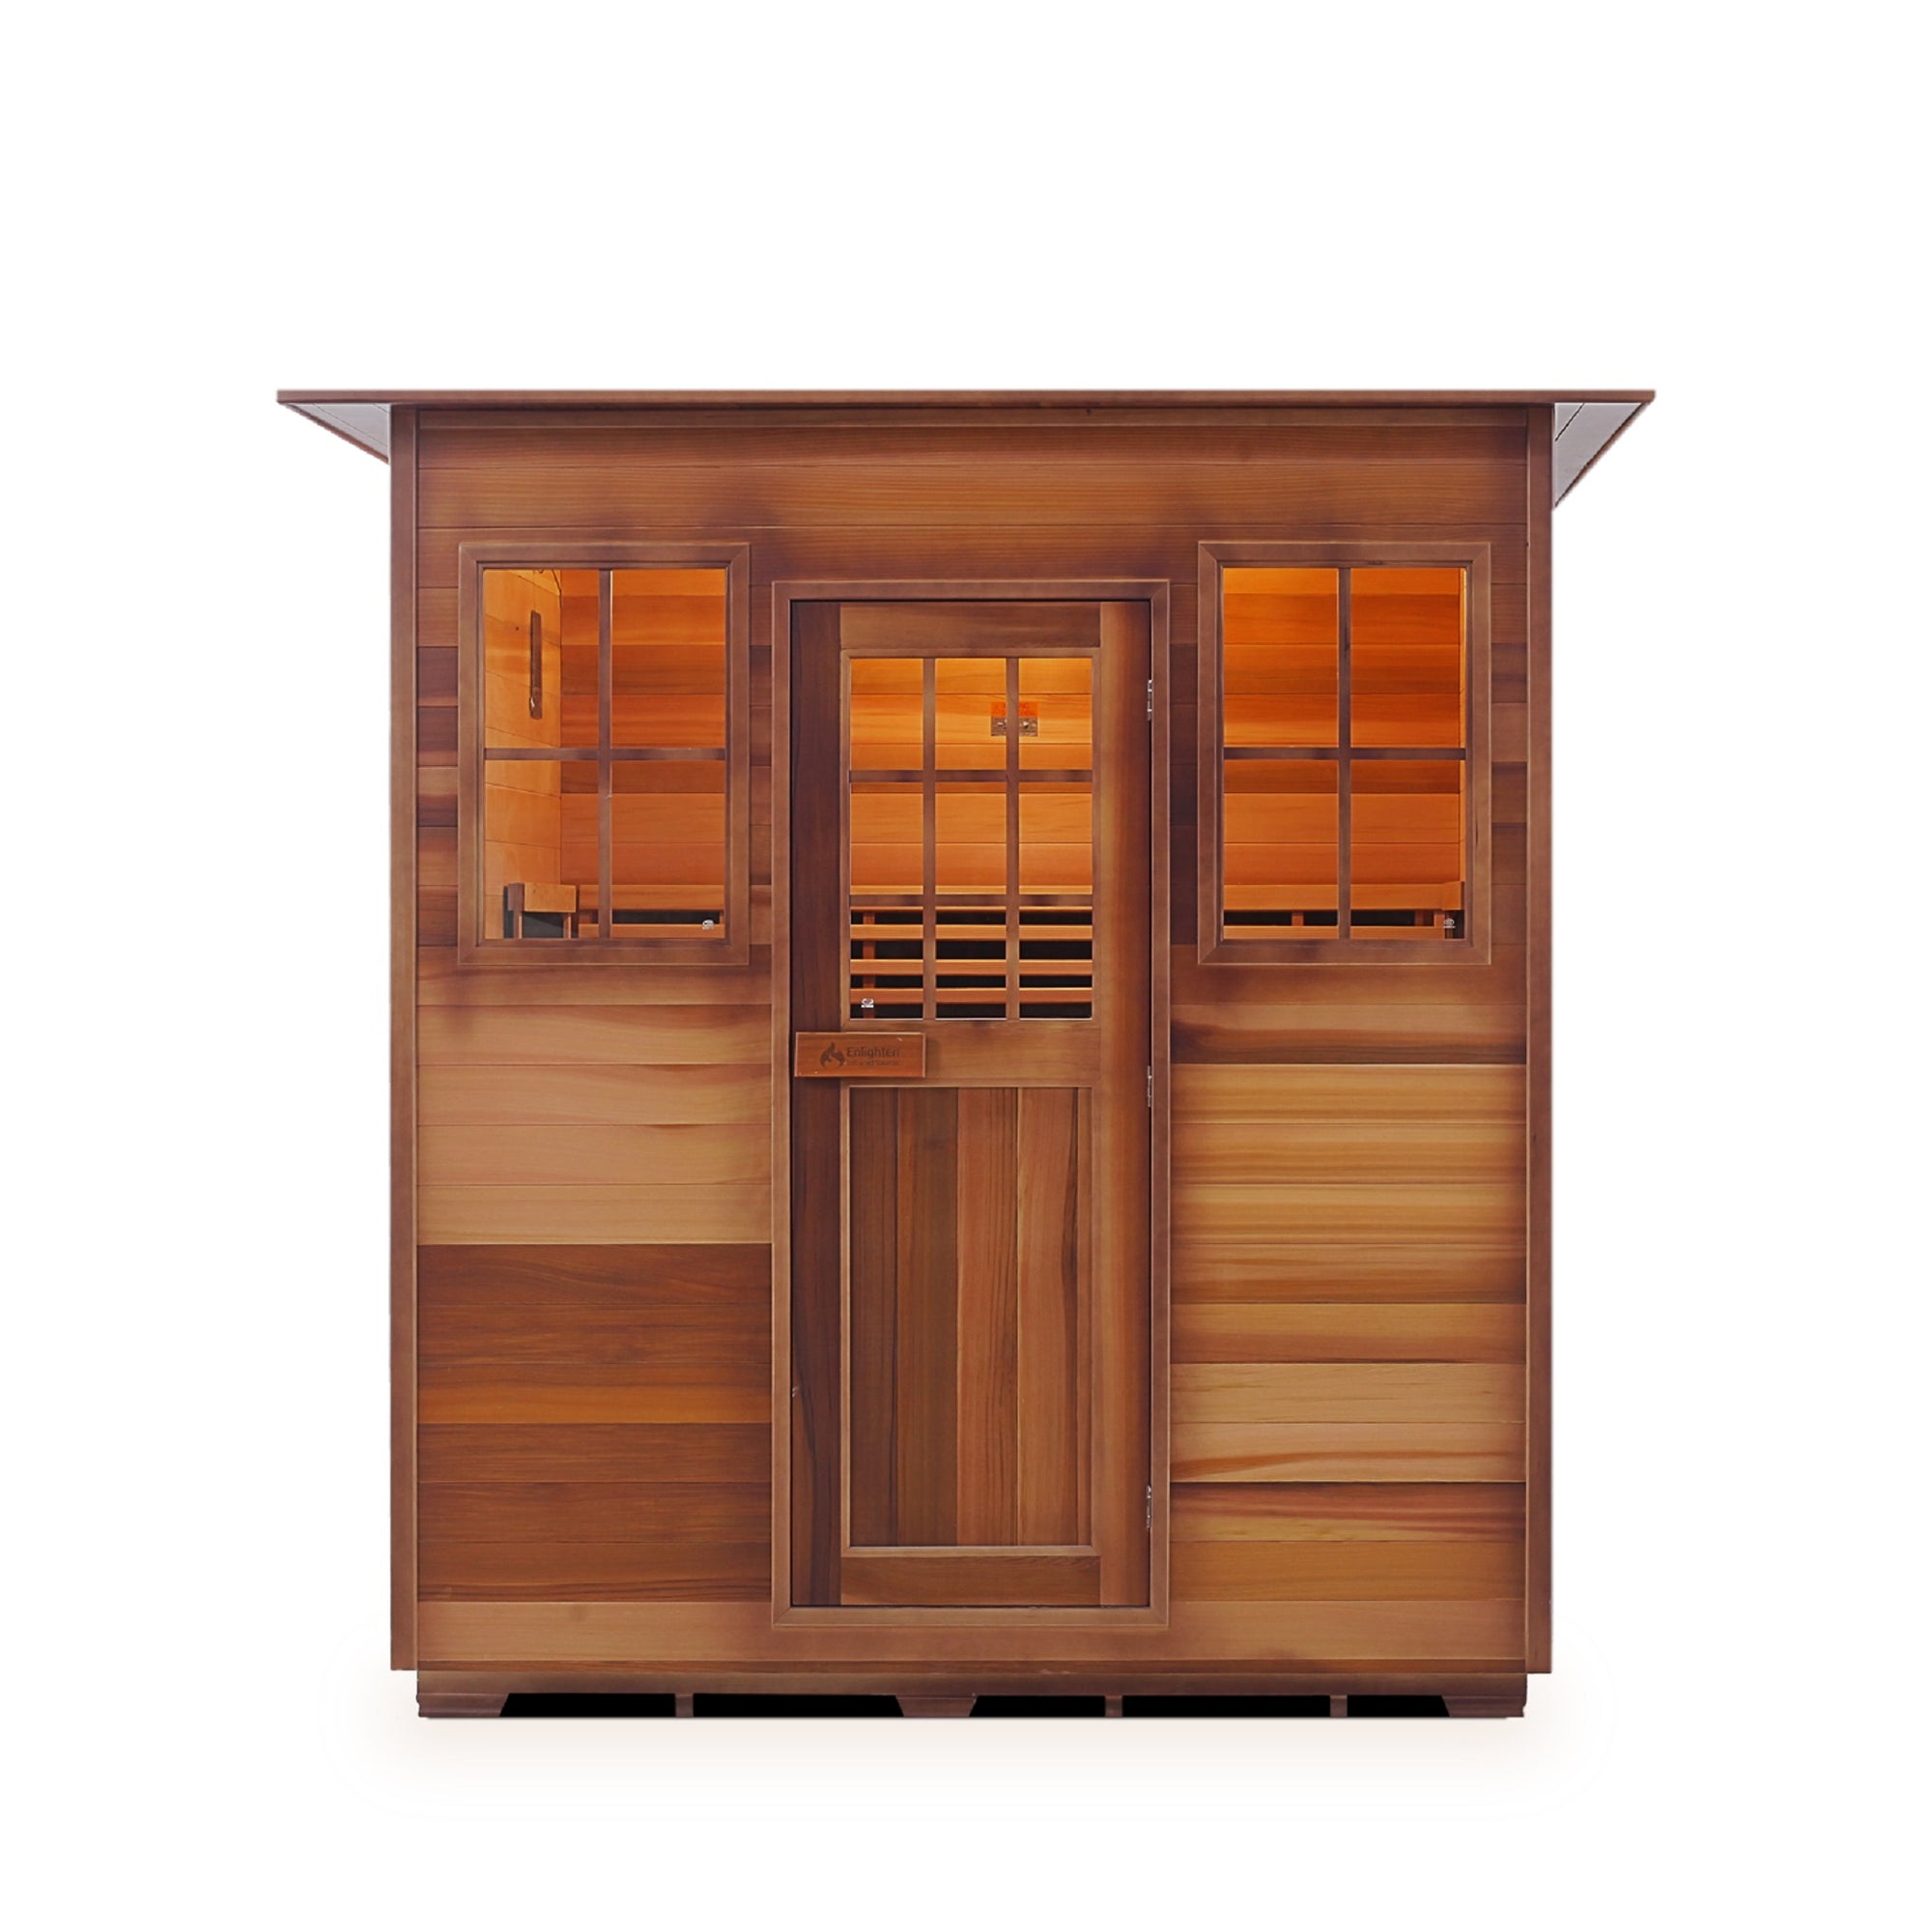 Enlighten Sauna InfraNature Original Infrared Canadian Red Cedar Wood Outside And Inside 4 person sauna with indoor Roofed front view